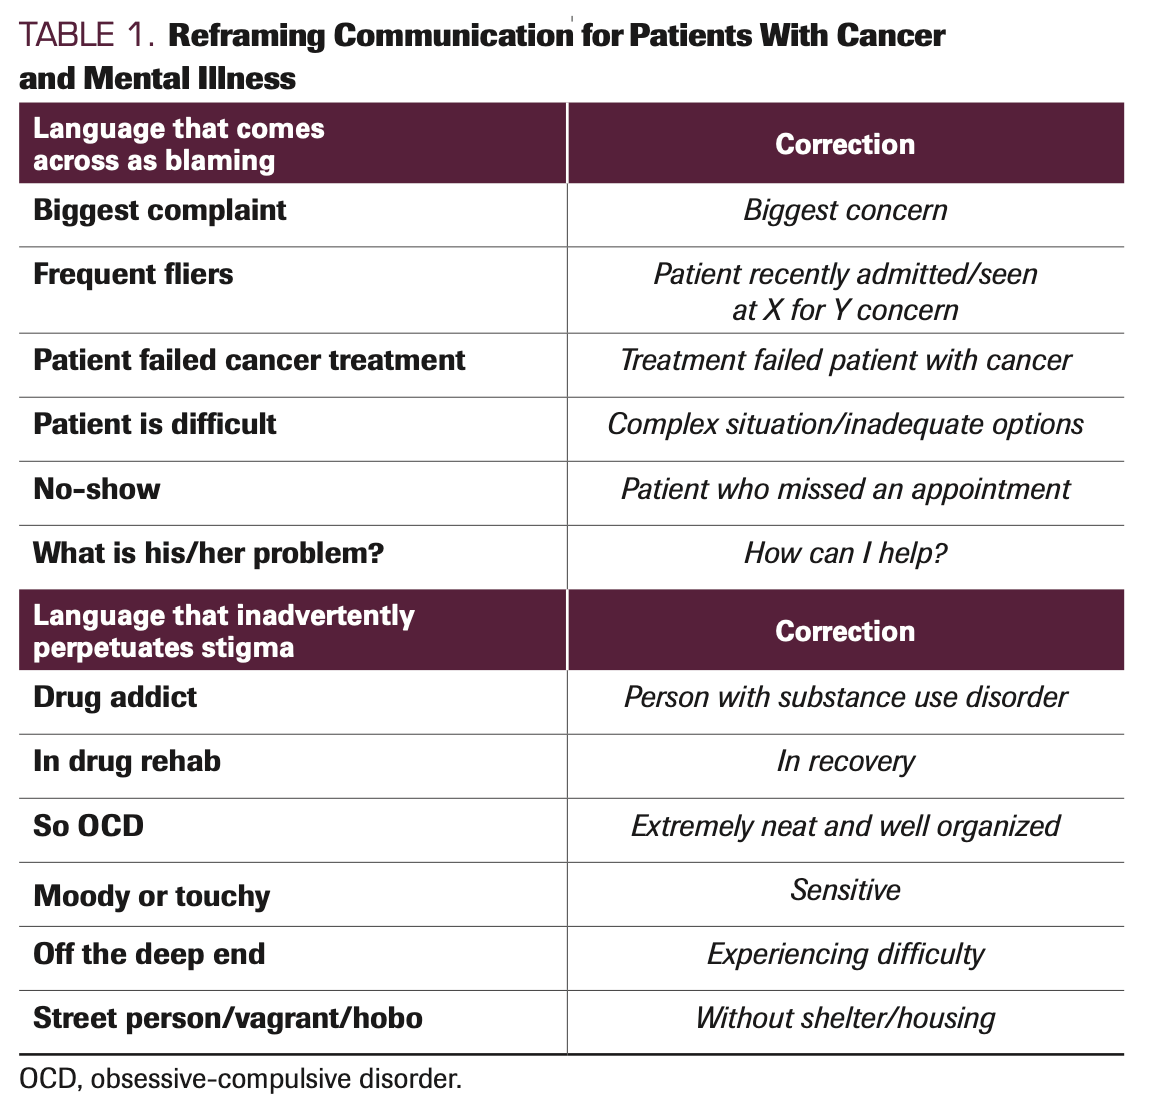 TABLE 1. Reframing Communication for Patients With Cancer and Mental Illness